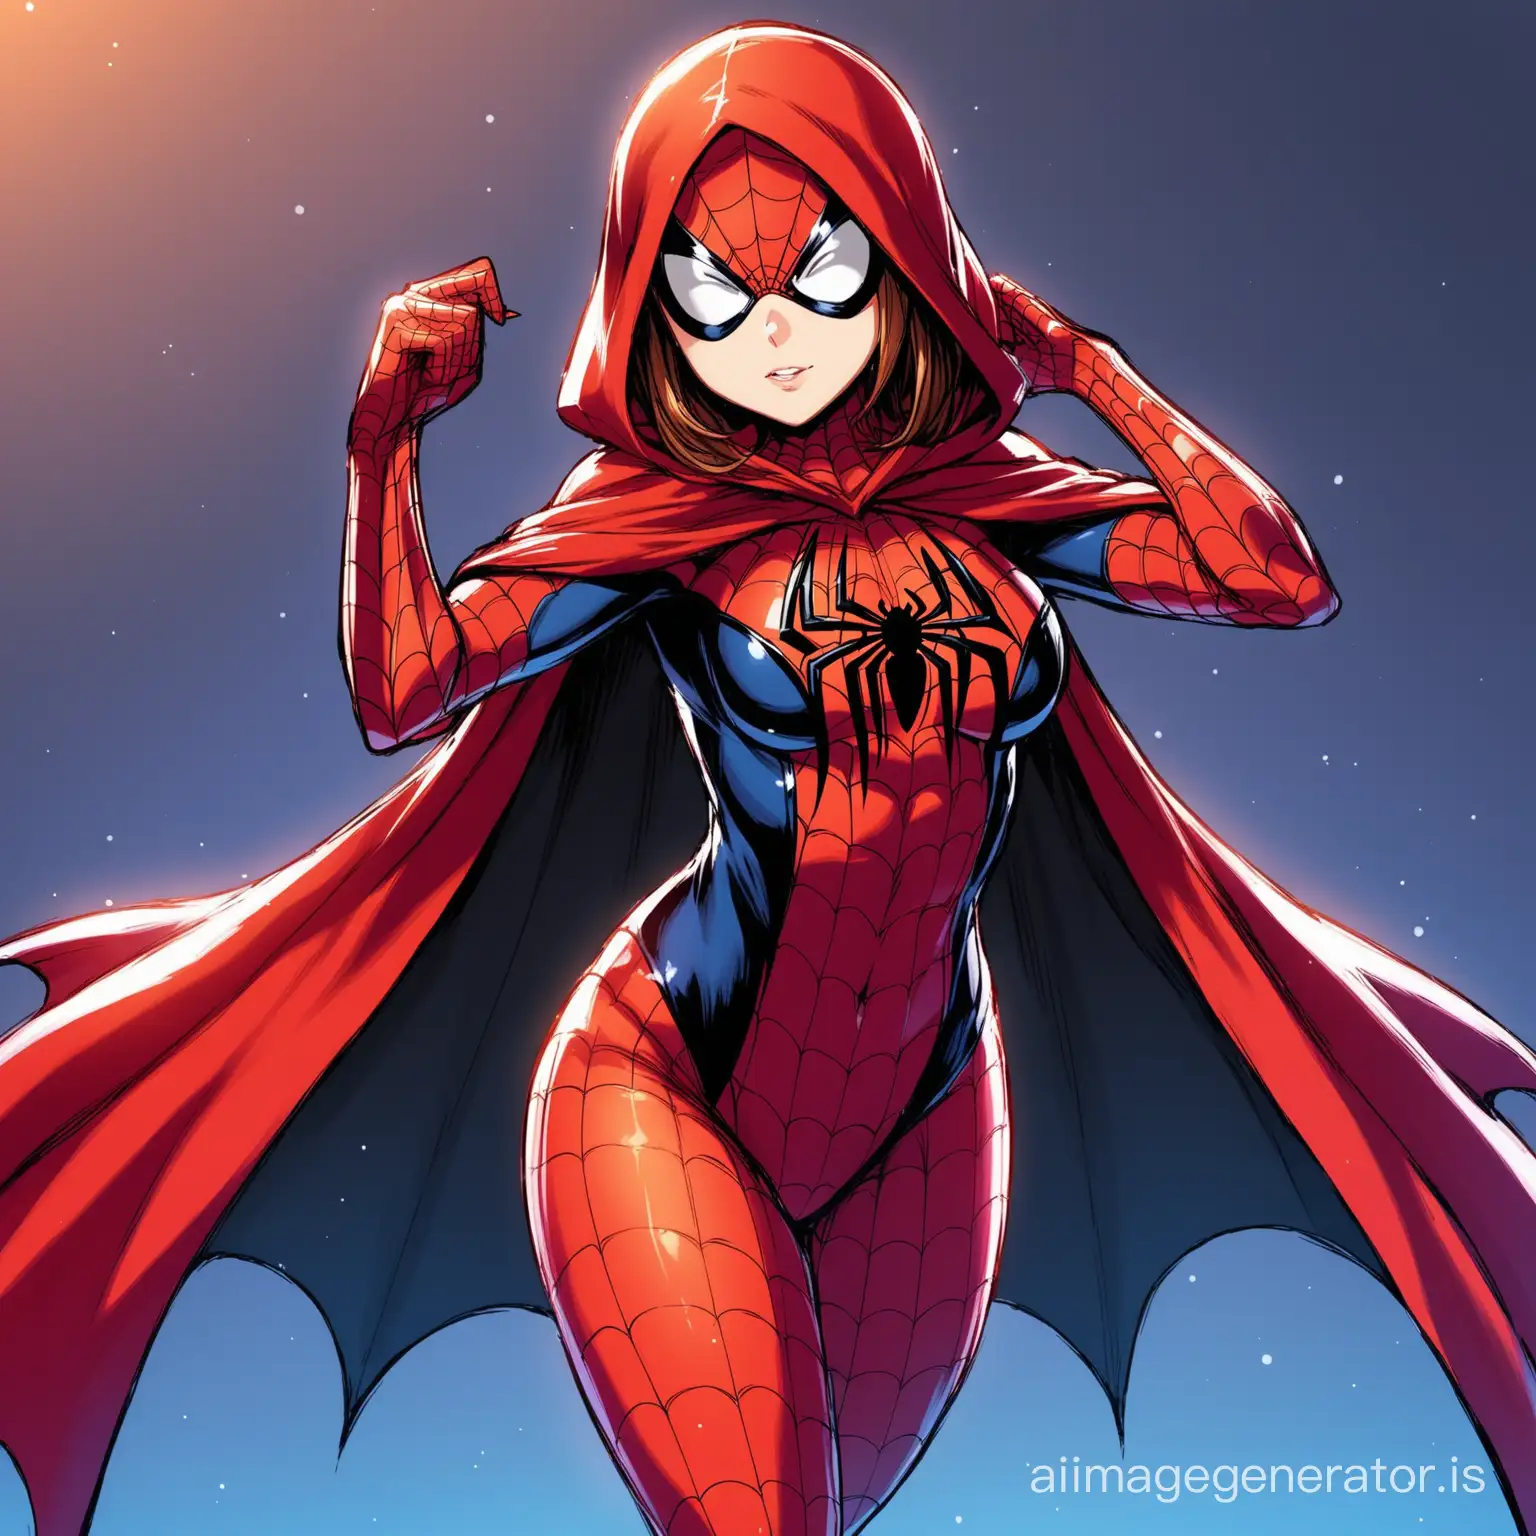 Seductive-Spidergirl-Sultry-Anime-Character-in-Captivating-Costume